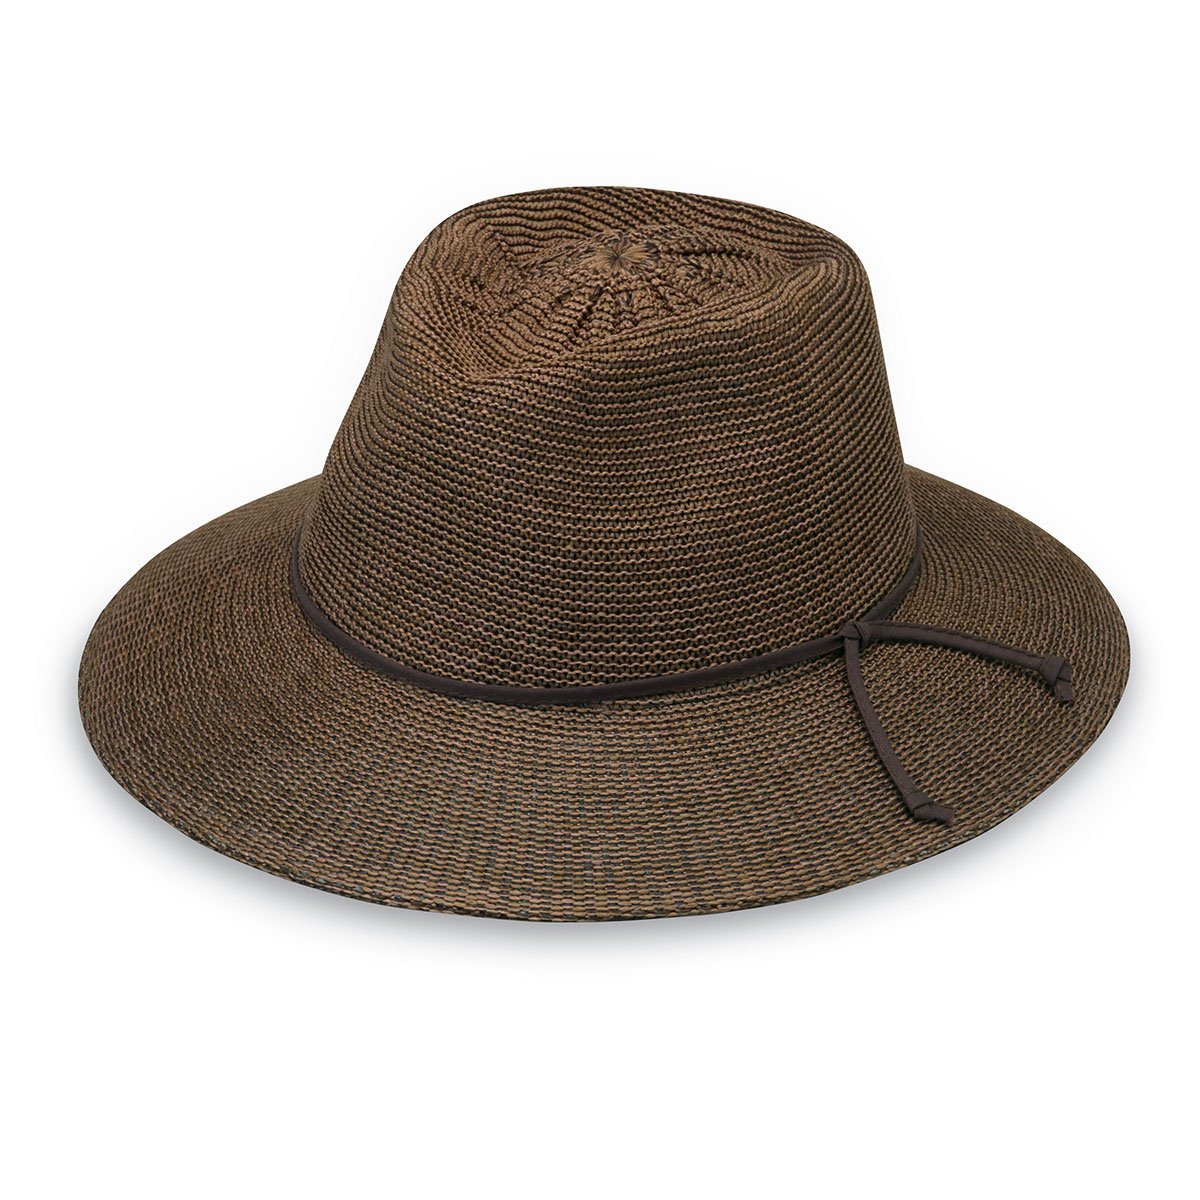 Featuring Ladies' Victoria Fedora Style straw Summer Hat for travel in Suede from Wallaroo